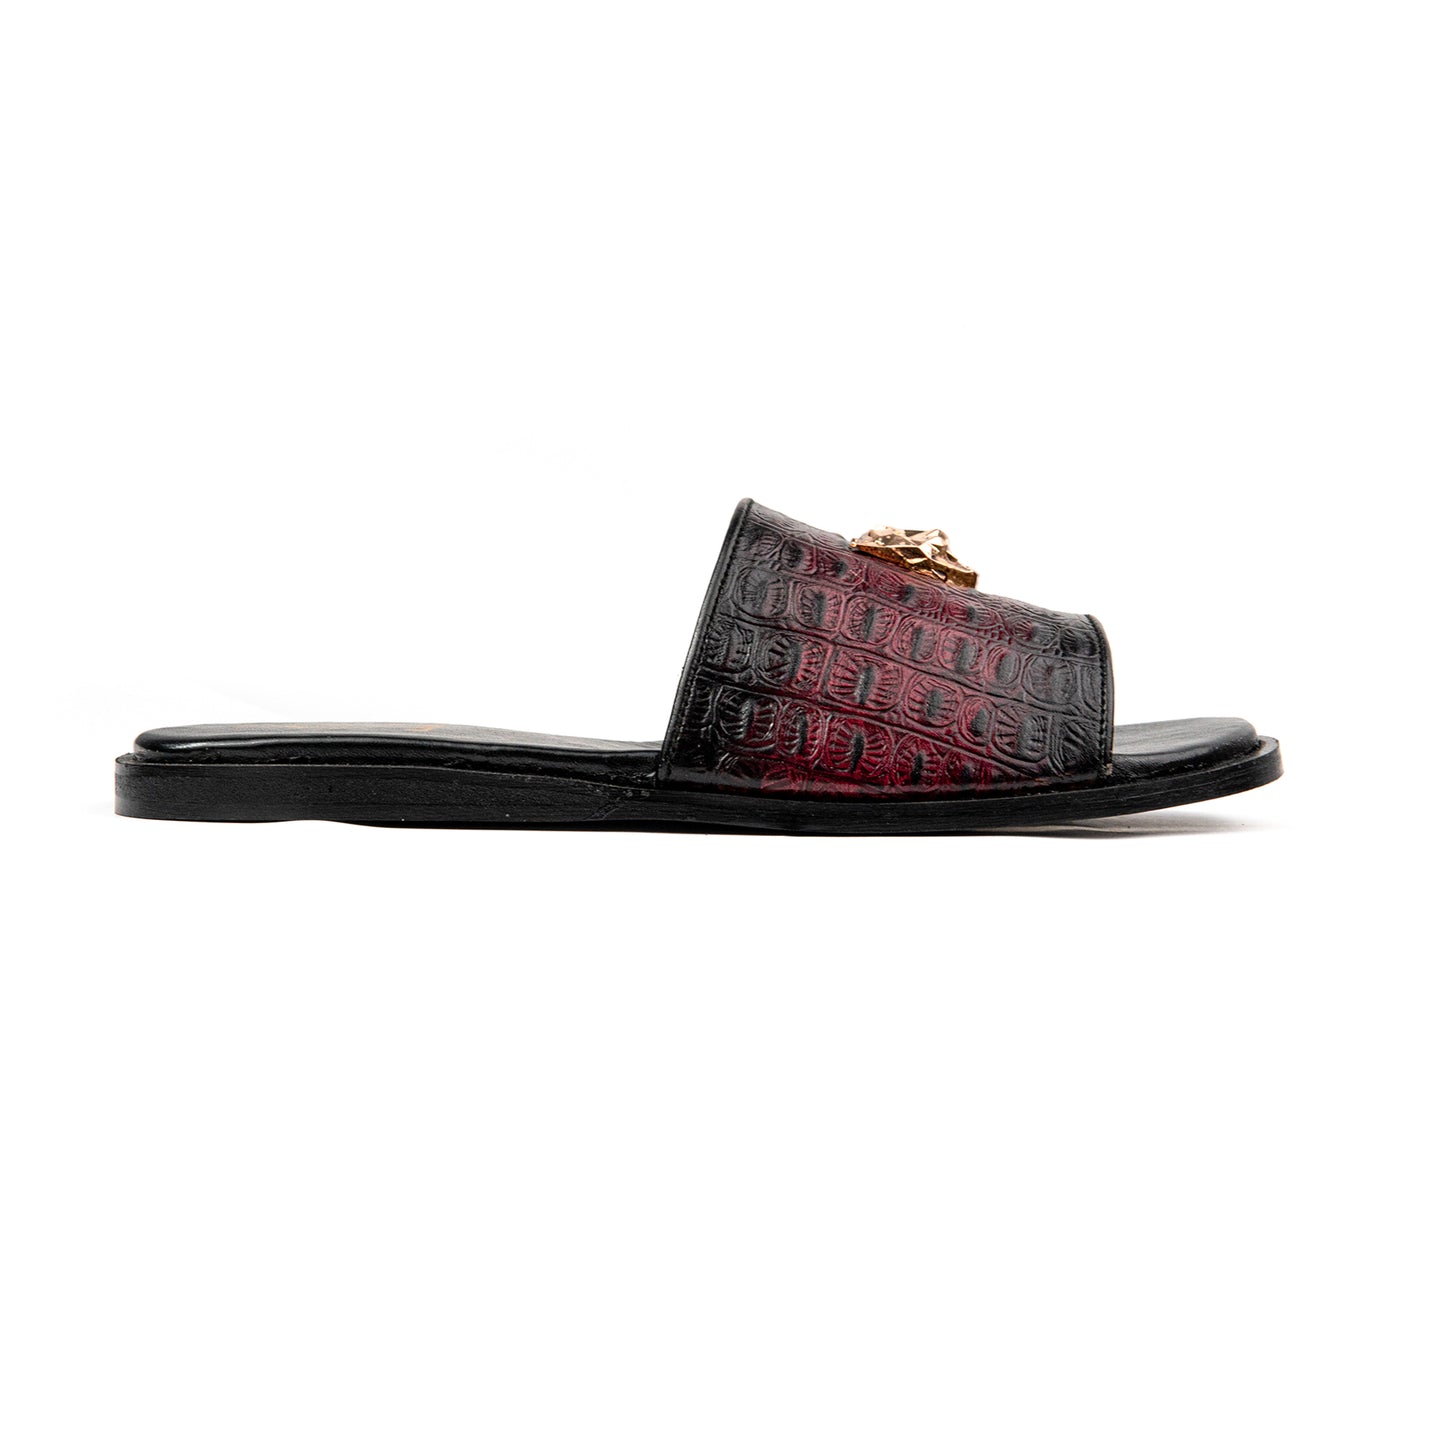 Dual Toned Buckled Premium Leather Slippers